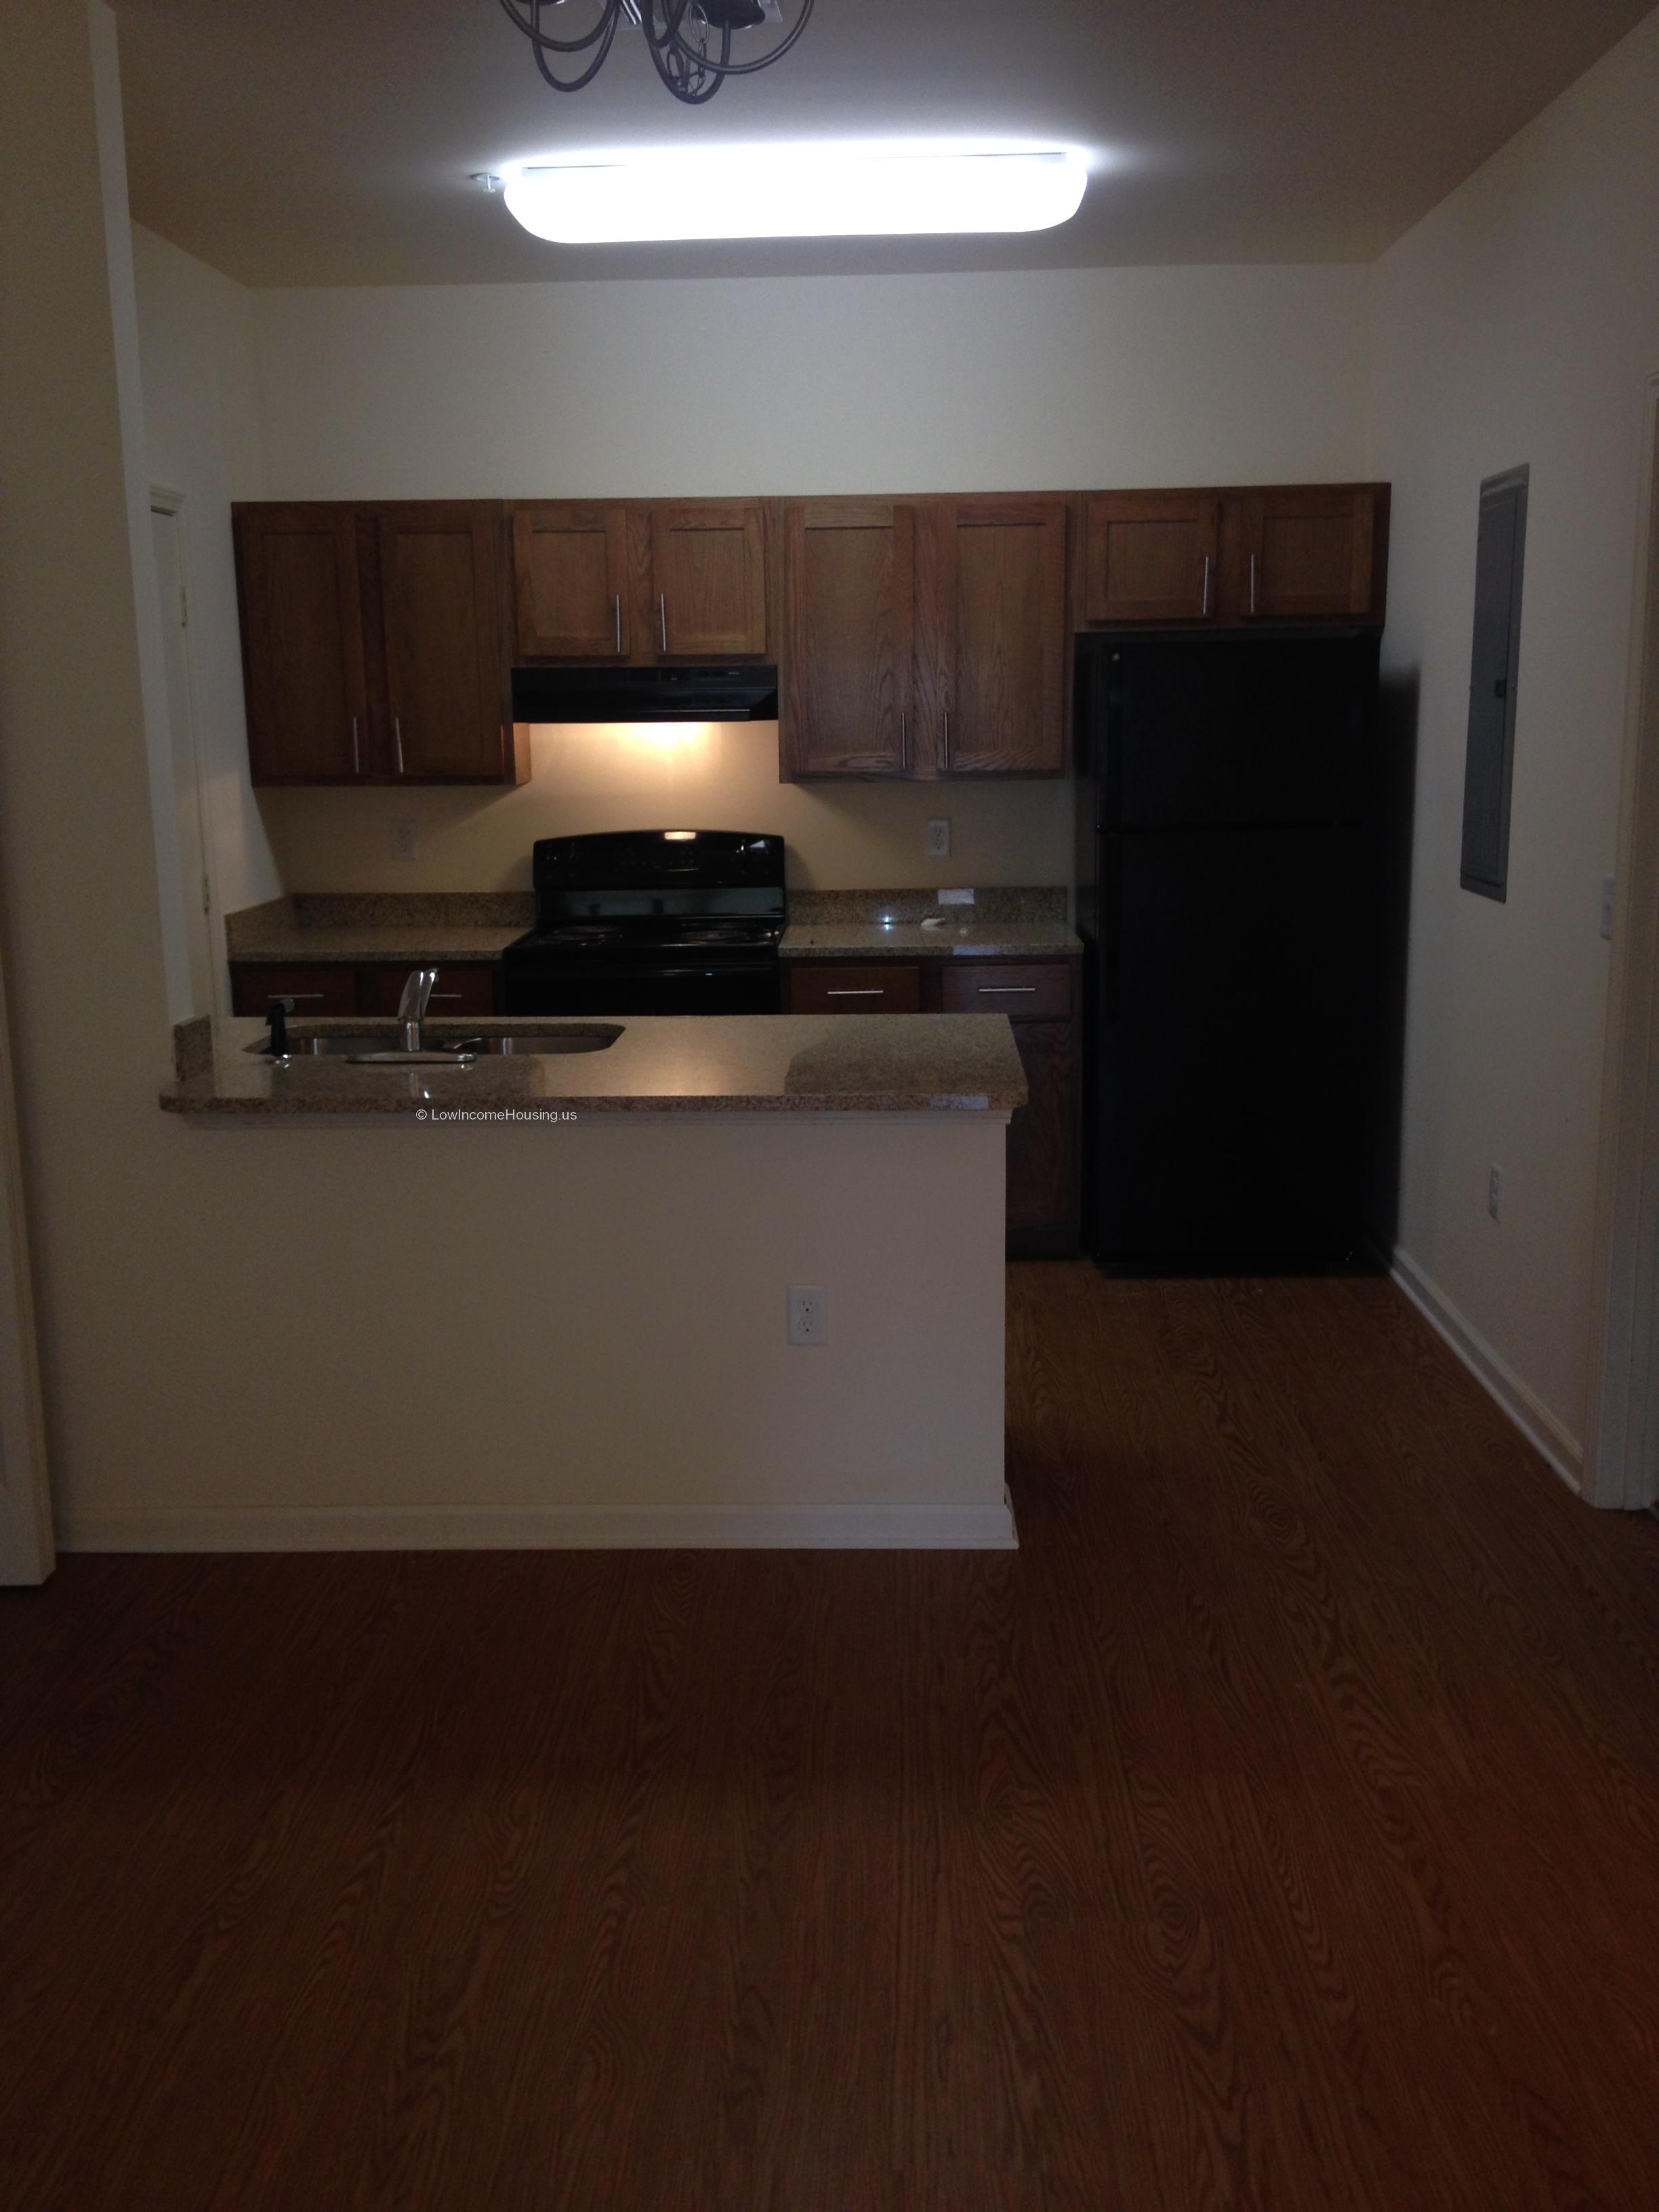 View of kitchen unit equipped with electric stove, twin sinks, refrigerator and freezer.